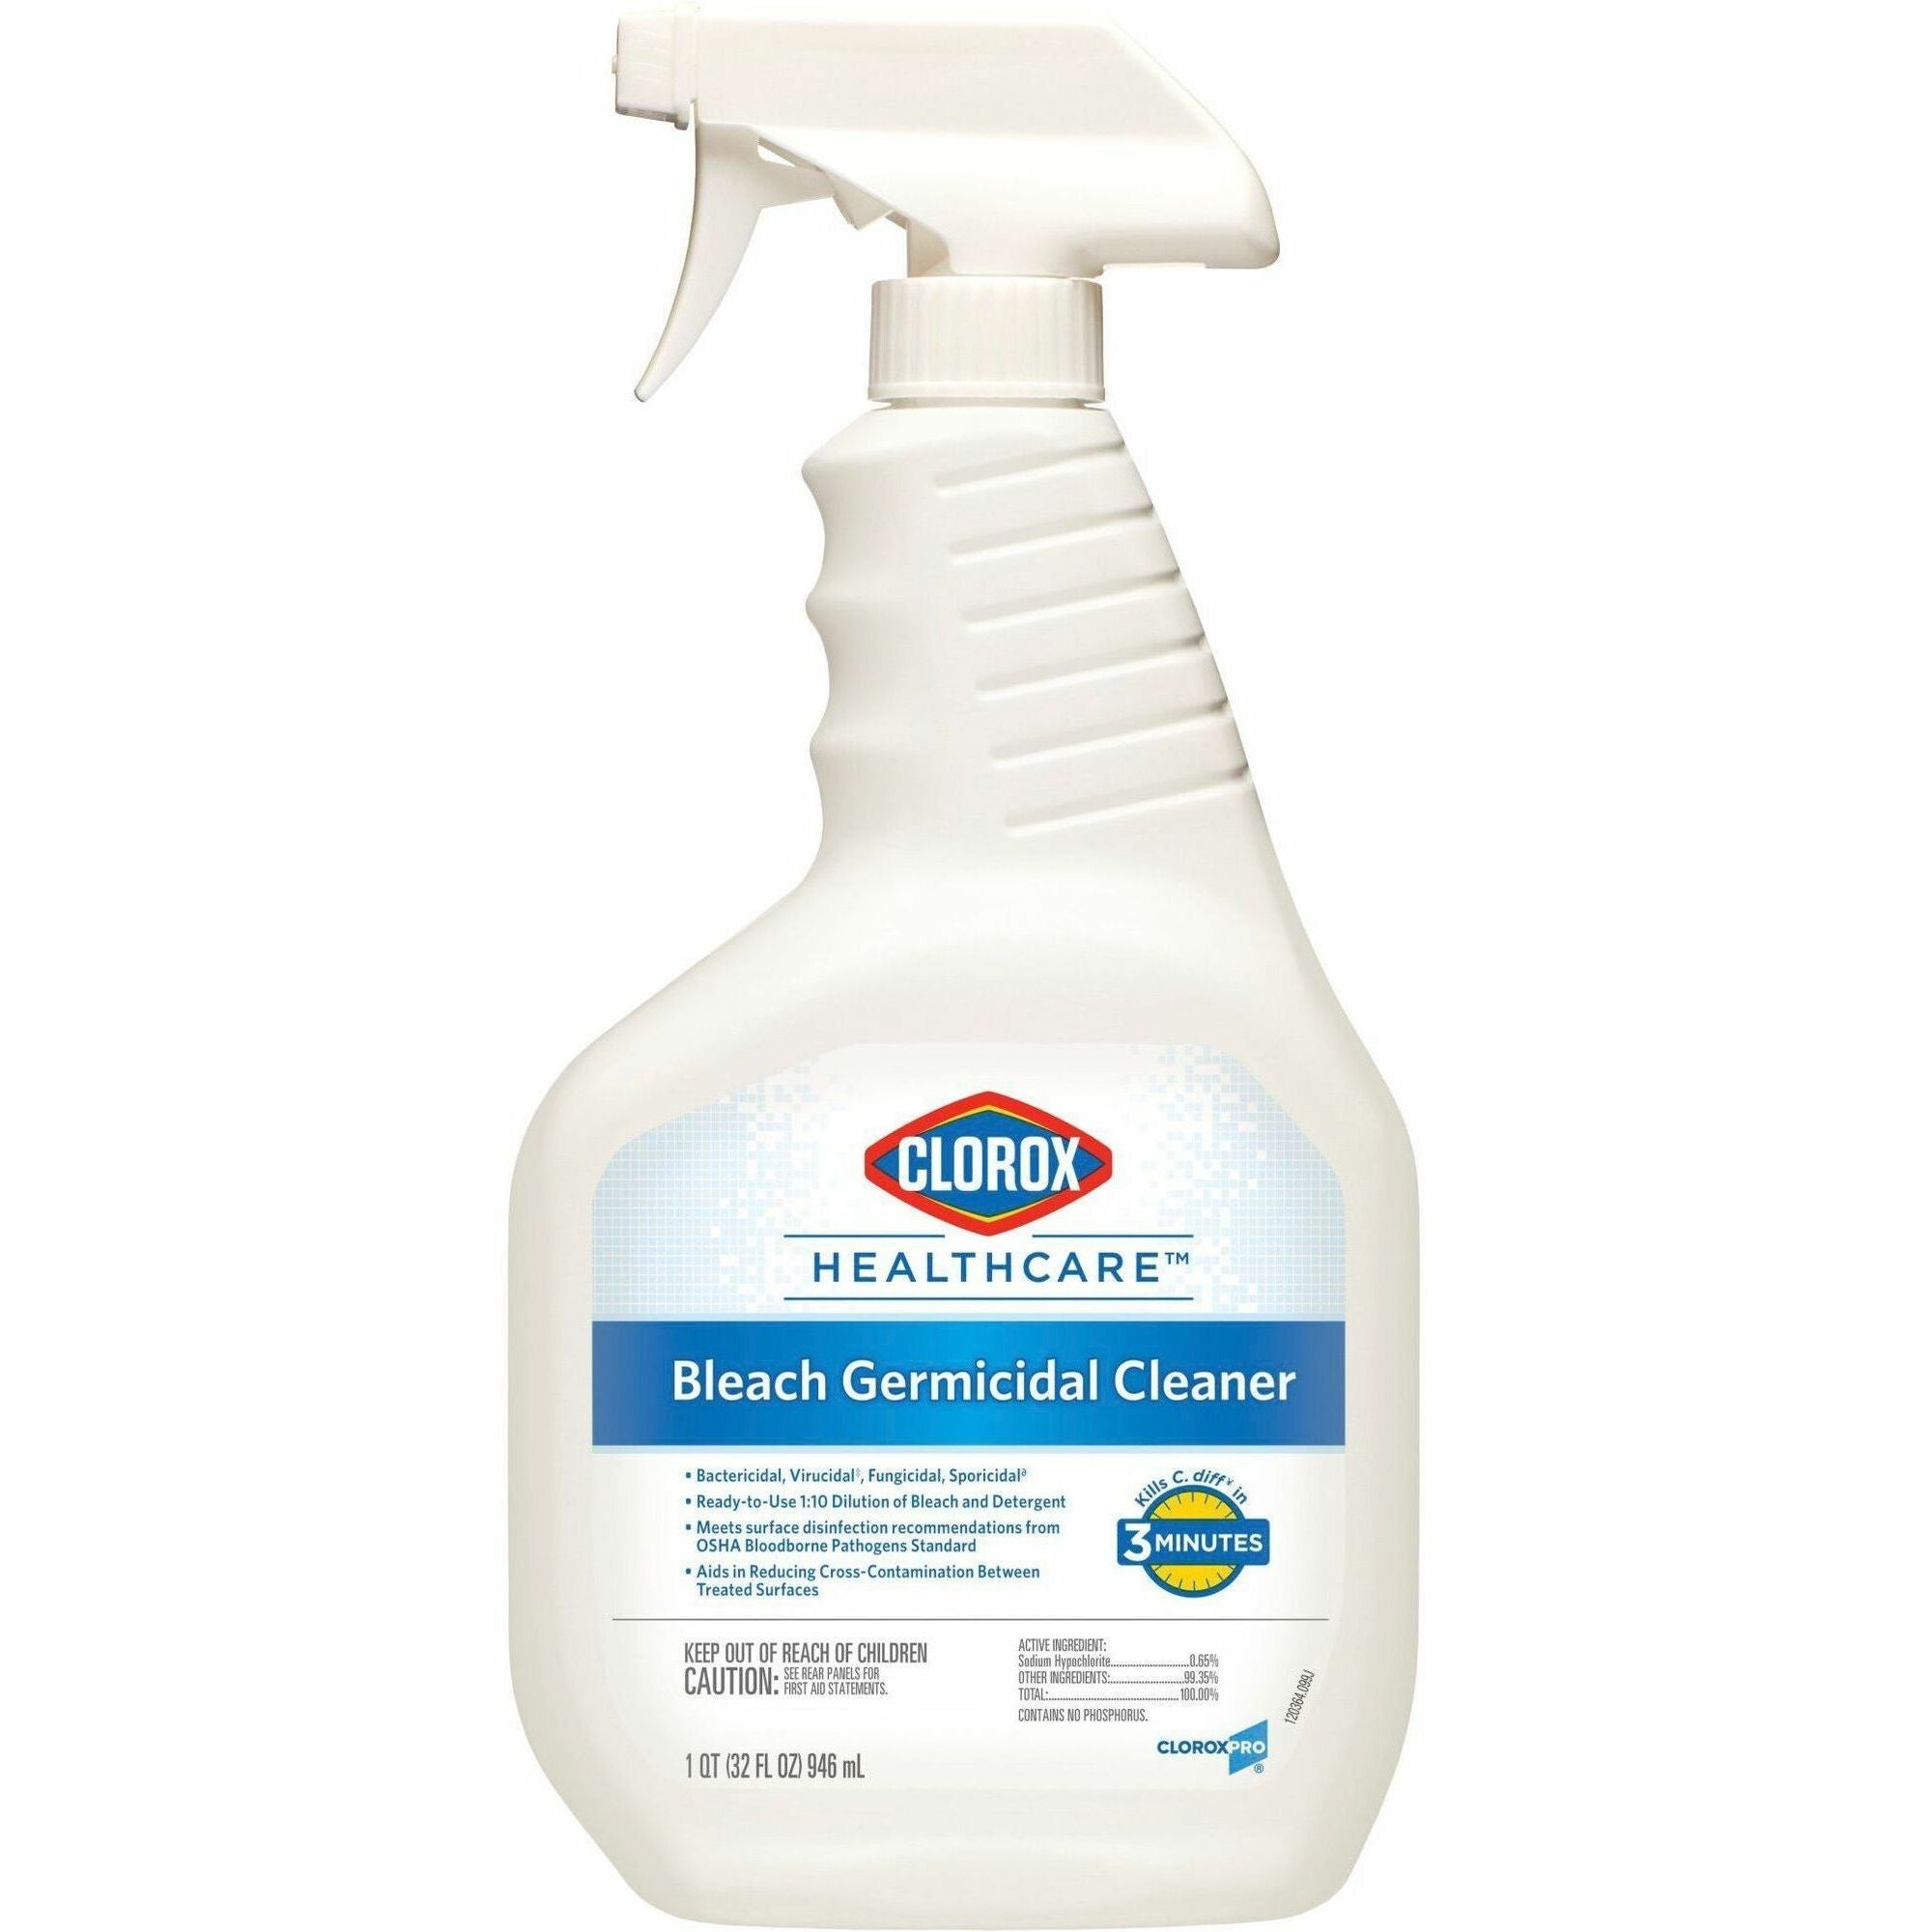 Clorox Healthcare Bleach Germicidal Cleaner - Ready-To-Use - 32 fl oz (1 quart)Bottle - 360 / Pallet - Anti-corrosive, Antibacterial, Disinfectant - White, Clear - 1